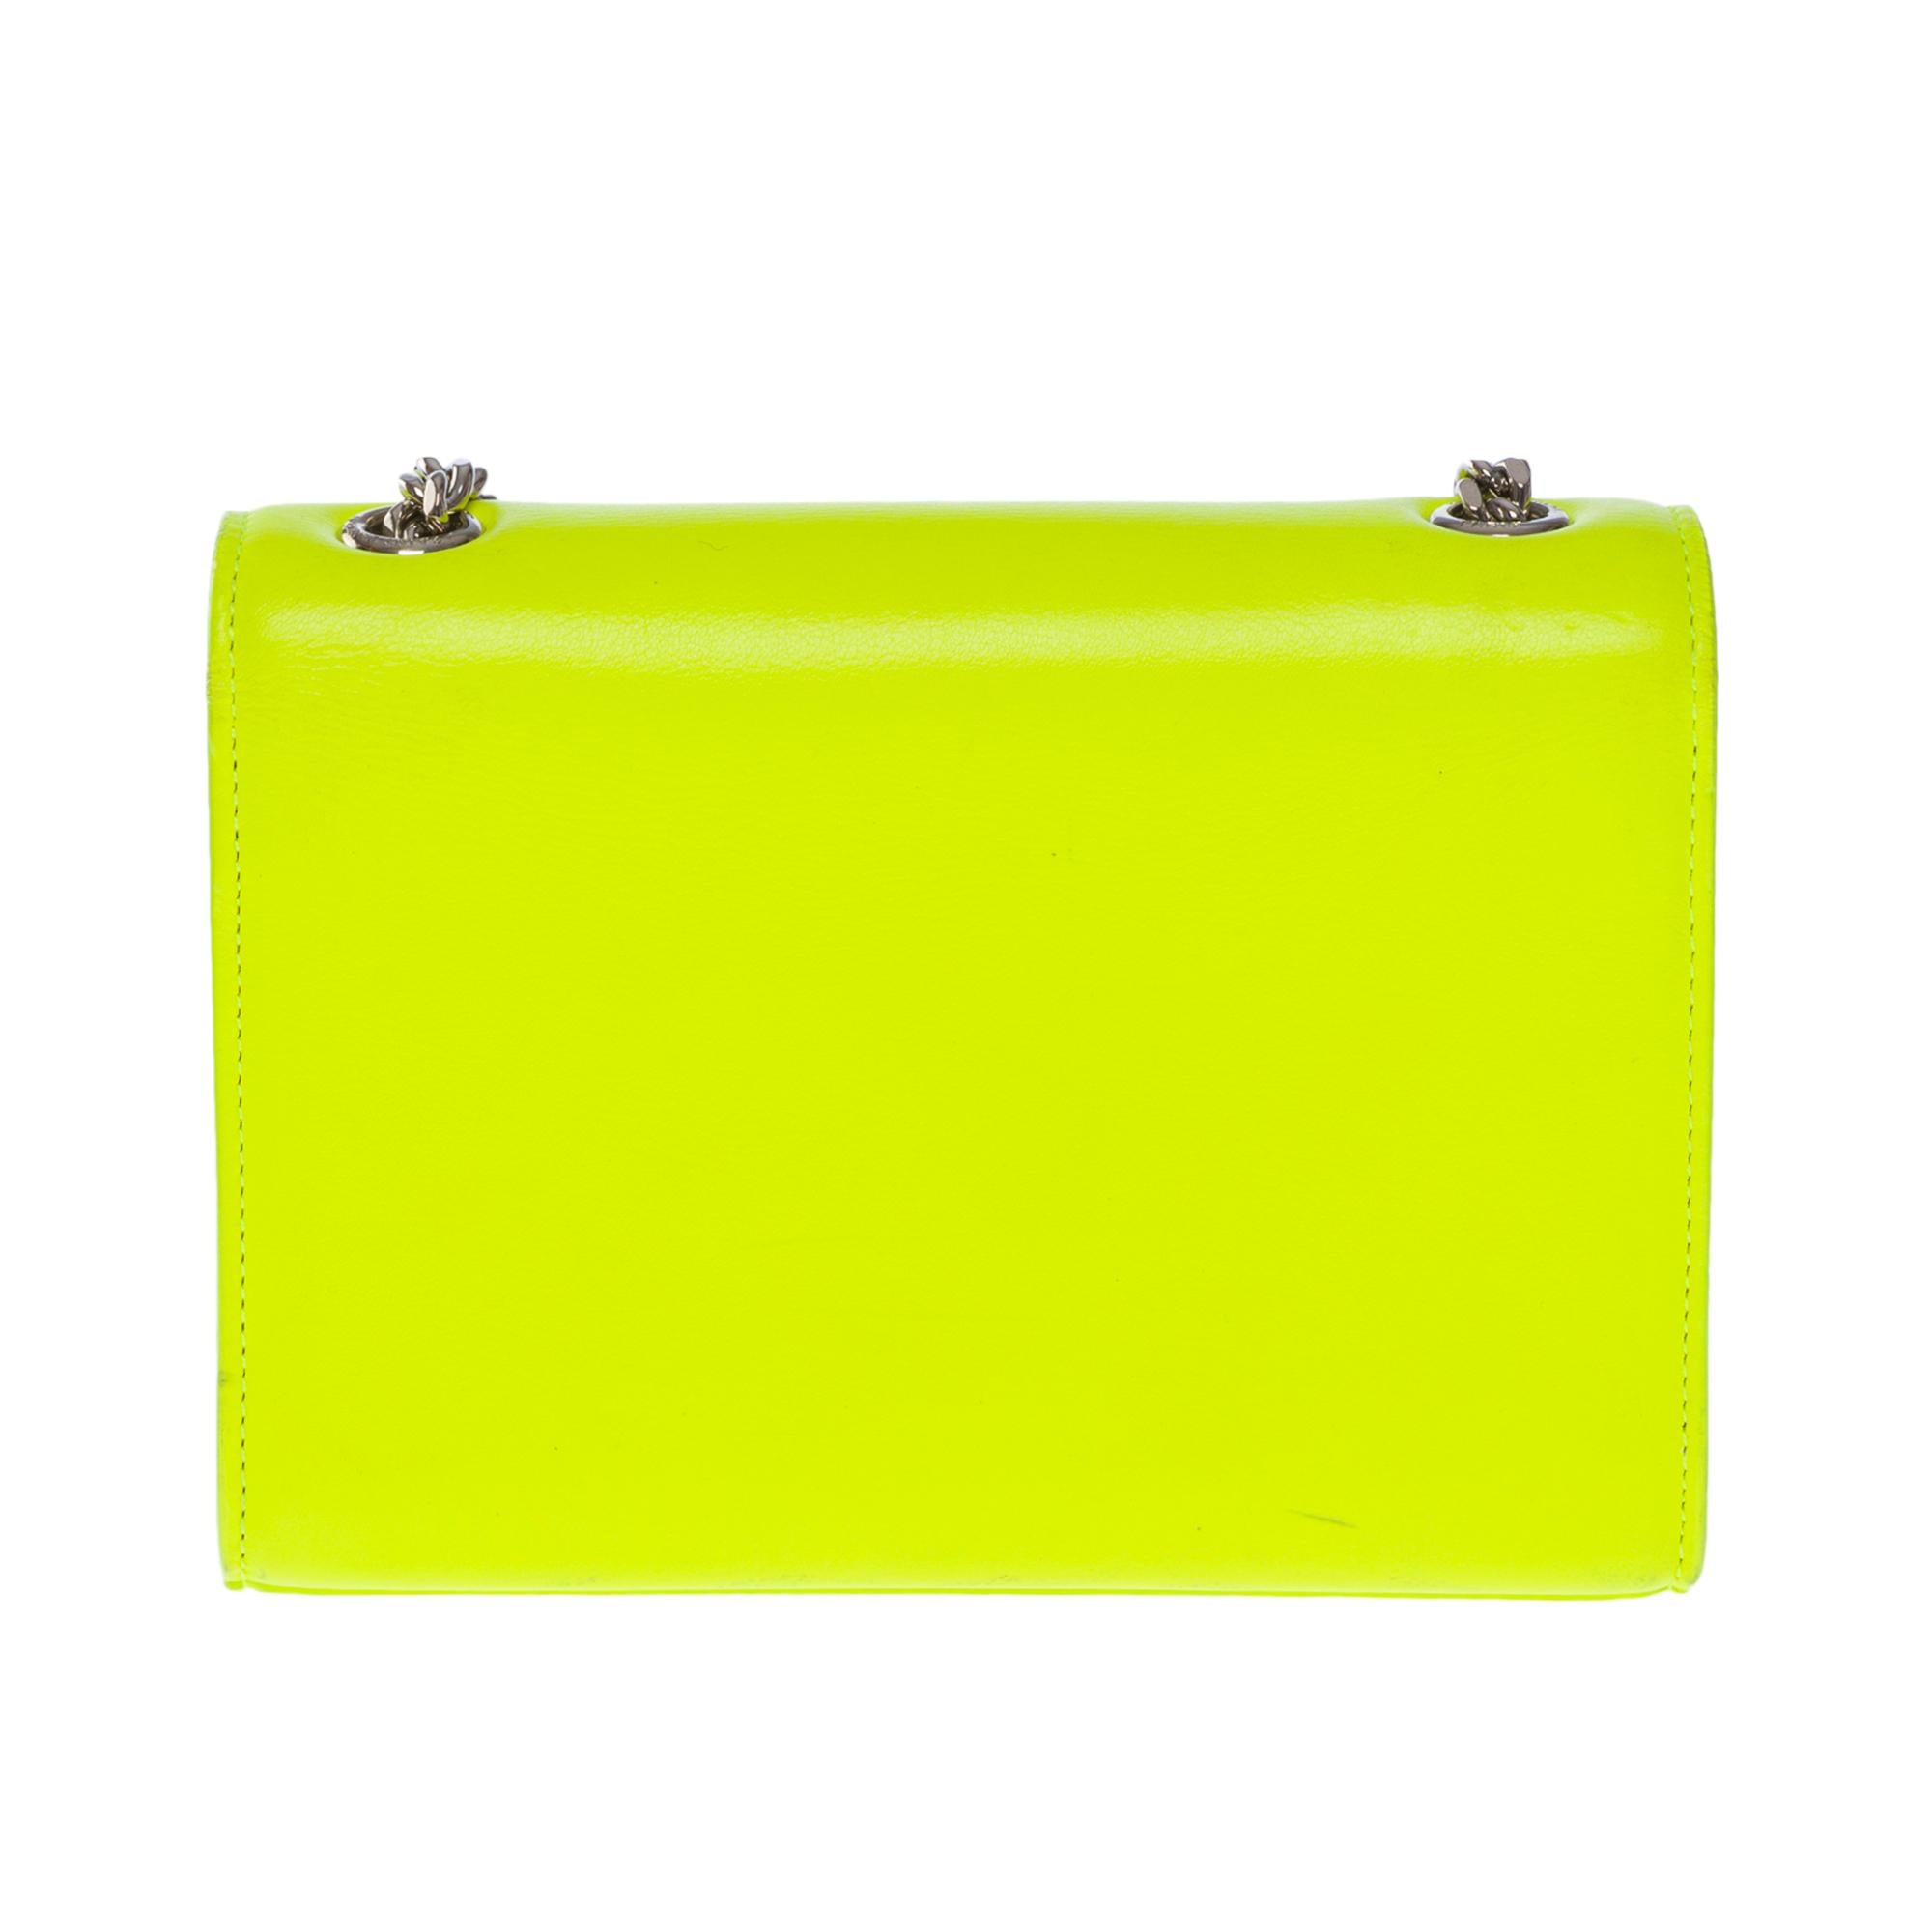 The bright Saint Laurent Kate shoulder bag in neon yellow leather, silver metal hardware, a convertible chain handle in silver metal for a hand or shoulder or shoulder strap

Magnetic flap closure
Black leather lining, one patch pocket
Signature: